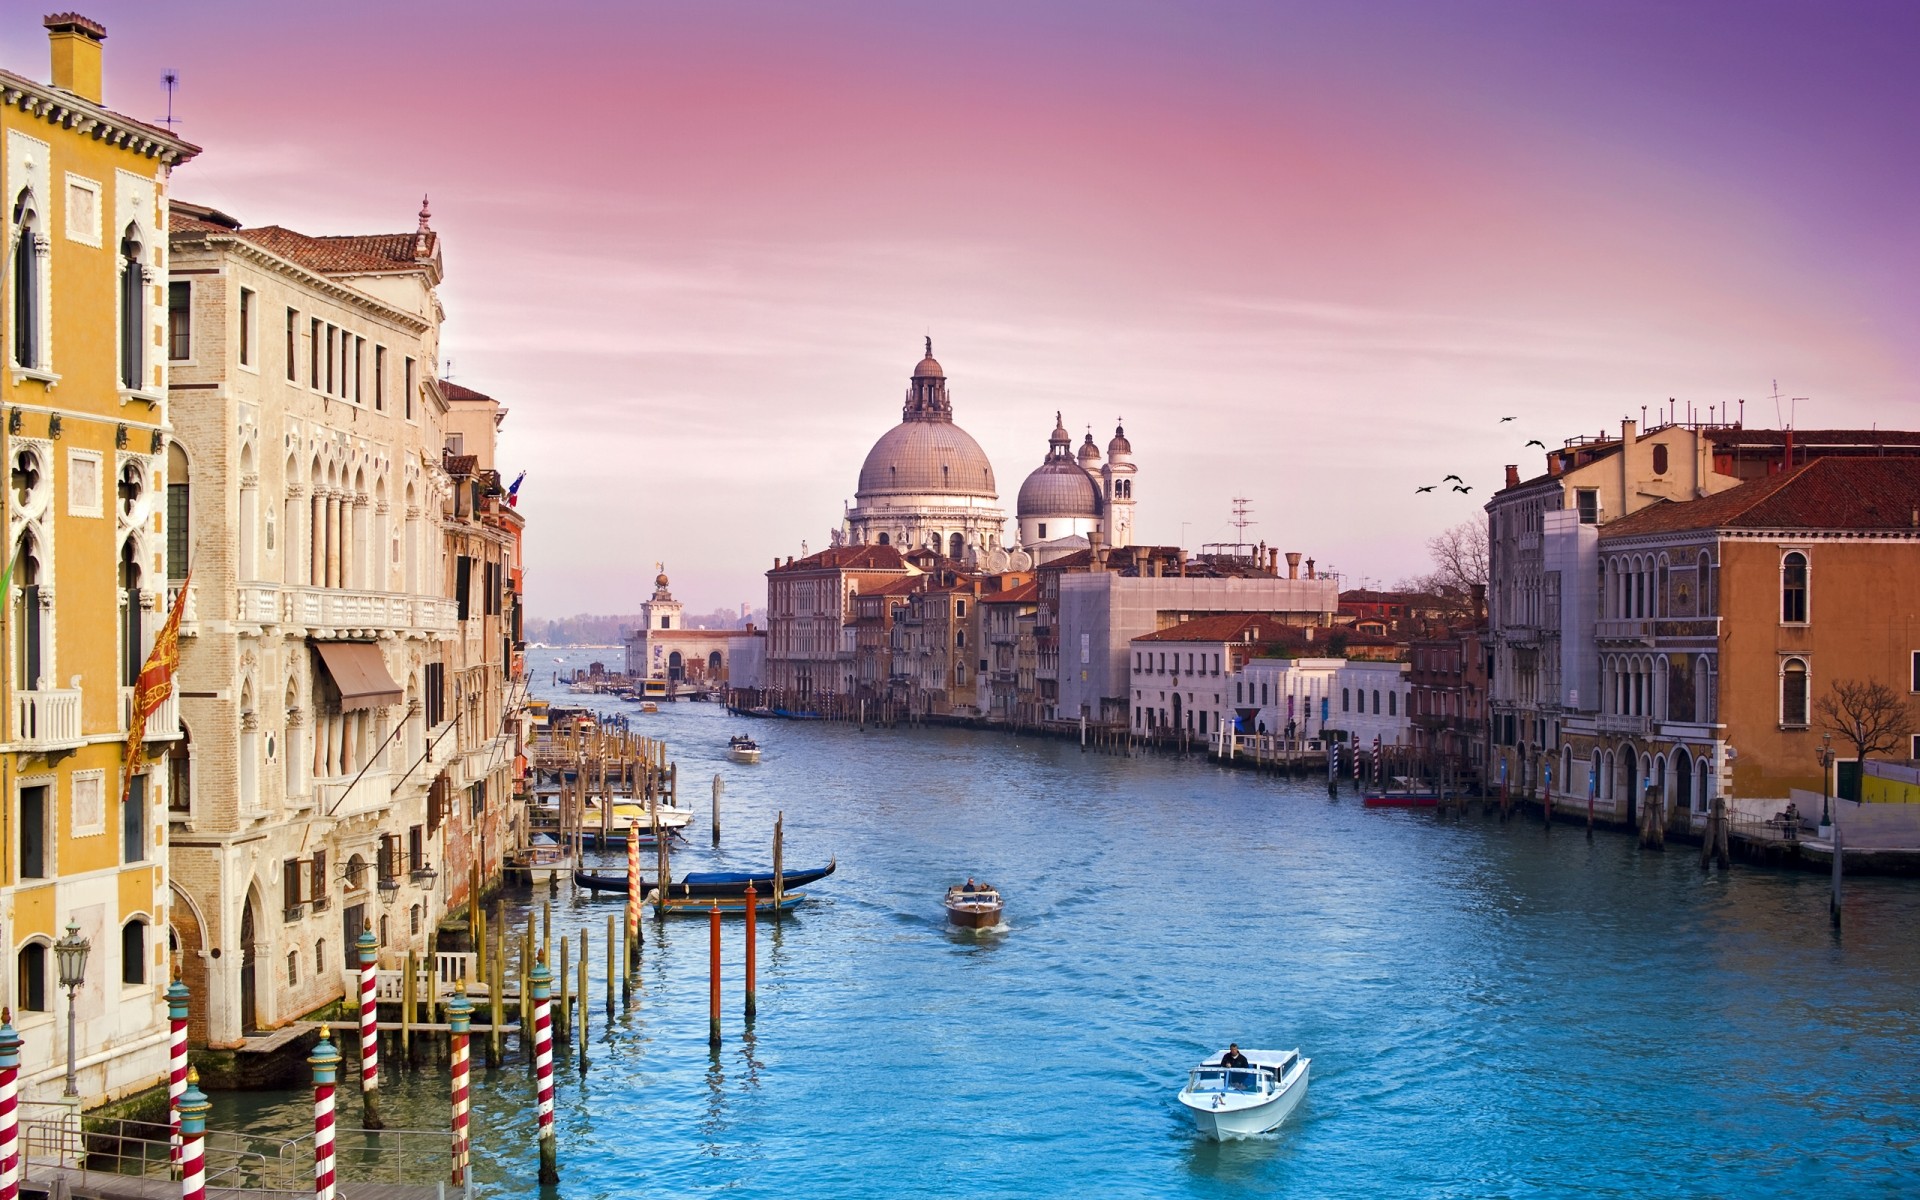 italy travel venetian architecture water gondola canal city outdoors sky dusk building tourism reflection old town traditional cityscape gondolier bridge venice